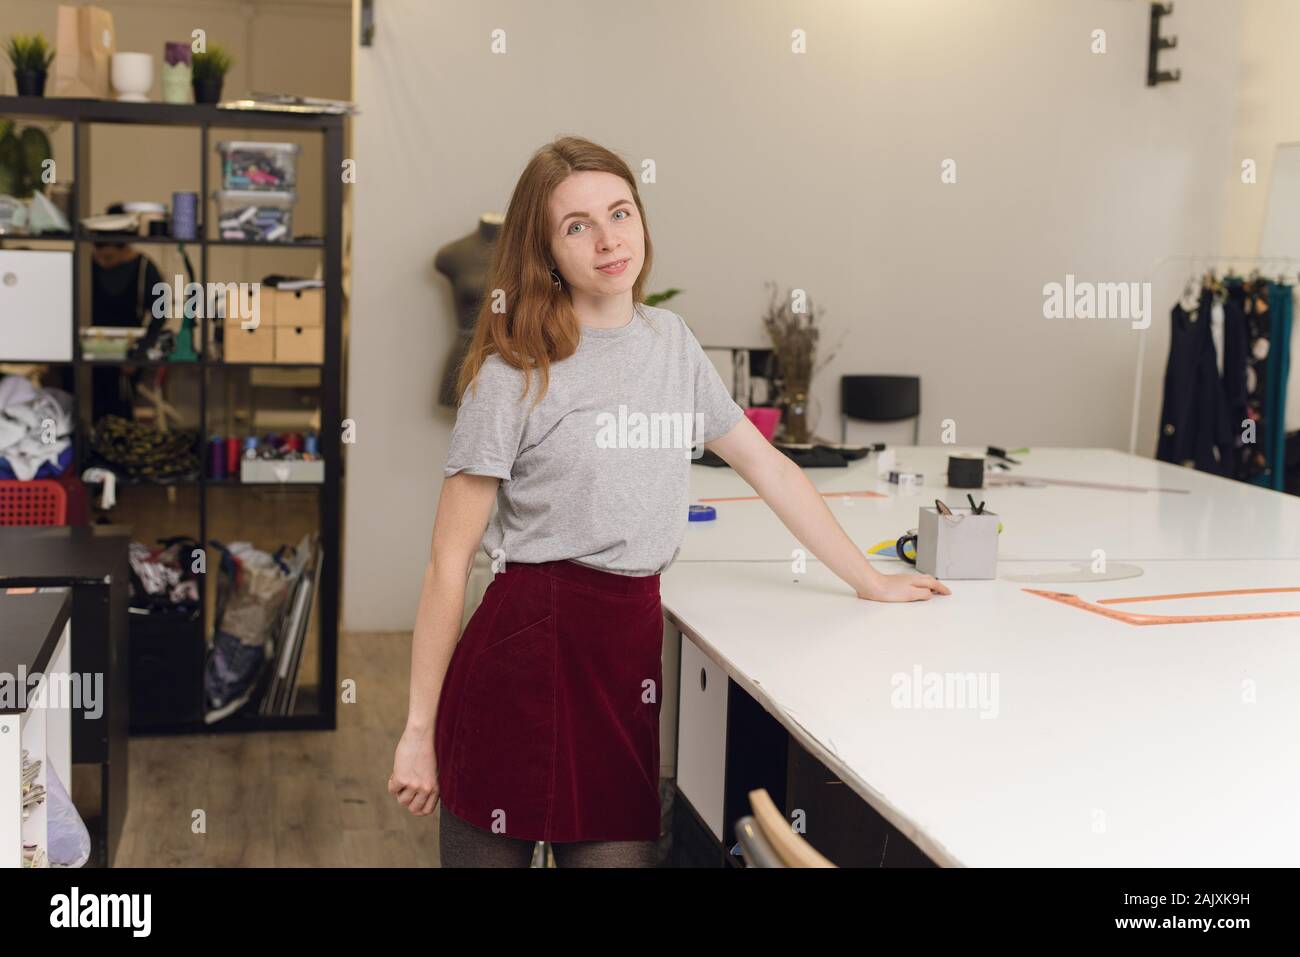 https://c8.alamy.com/comp/2AJXK9H/a-happy-seamstress-in-a-sewing-studio-looking-at-camera-portrait-of-a-beautiful-seamstress-carrying-a-tape-measure-and-working-in-a-textile-factory-2AJXK9H.jpg